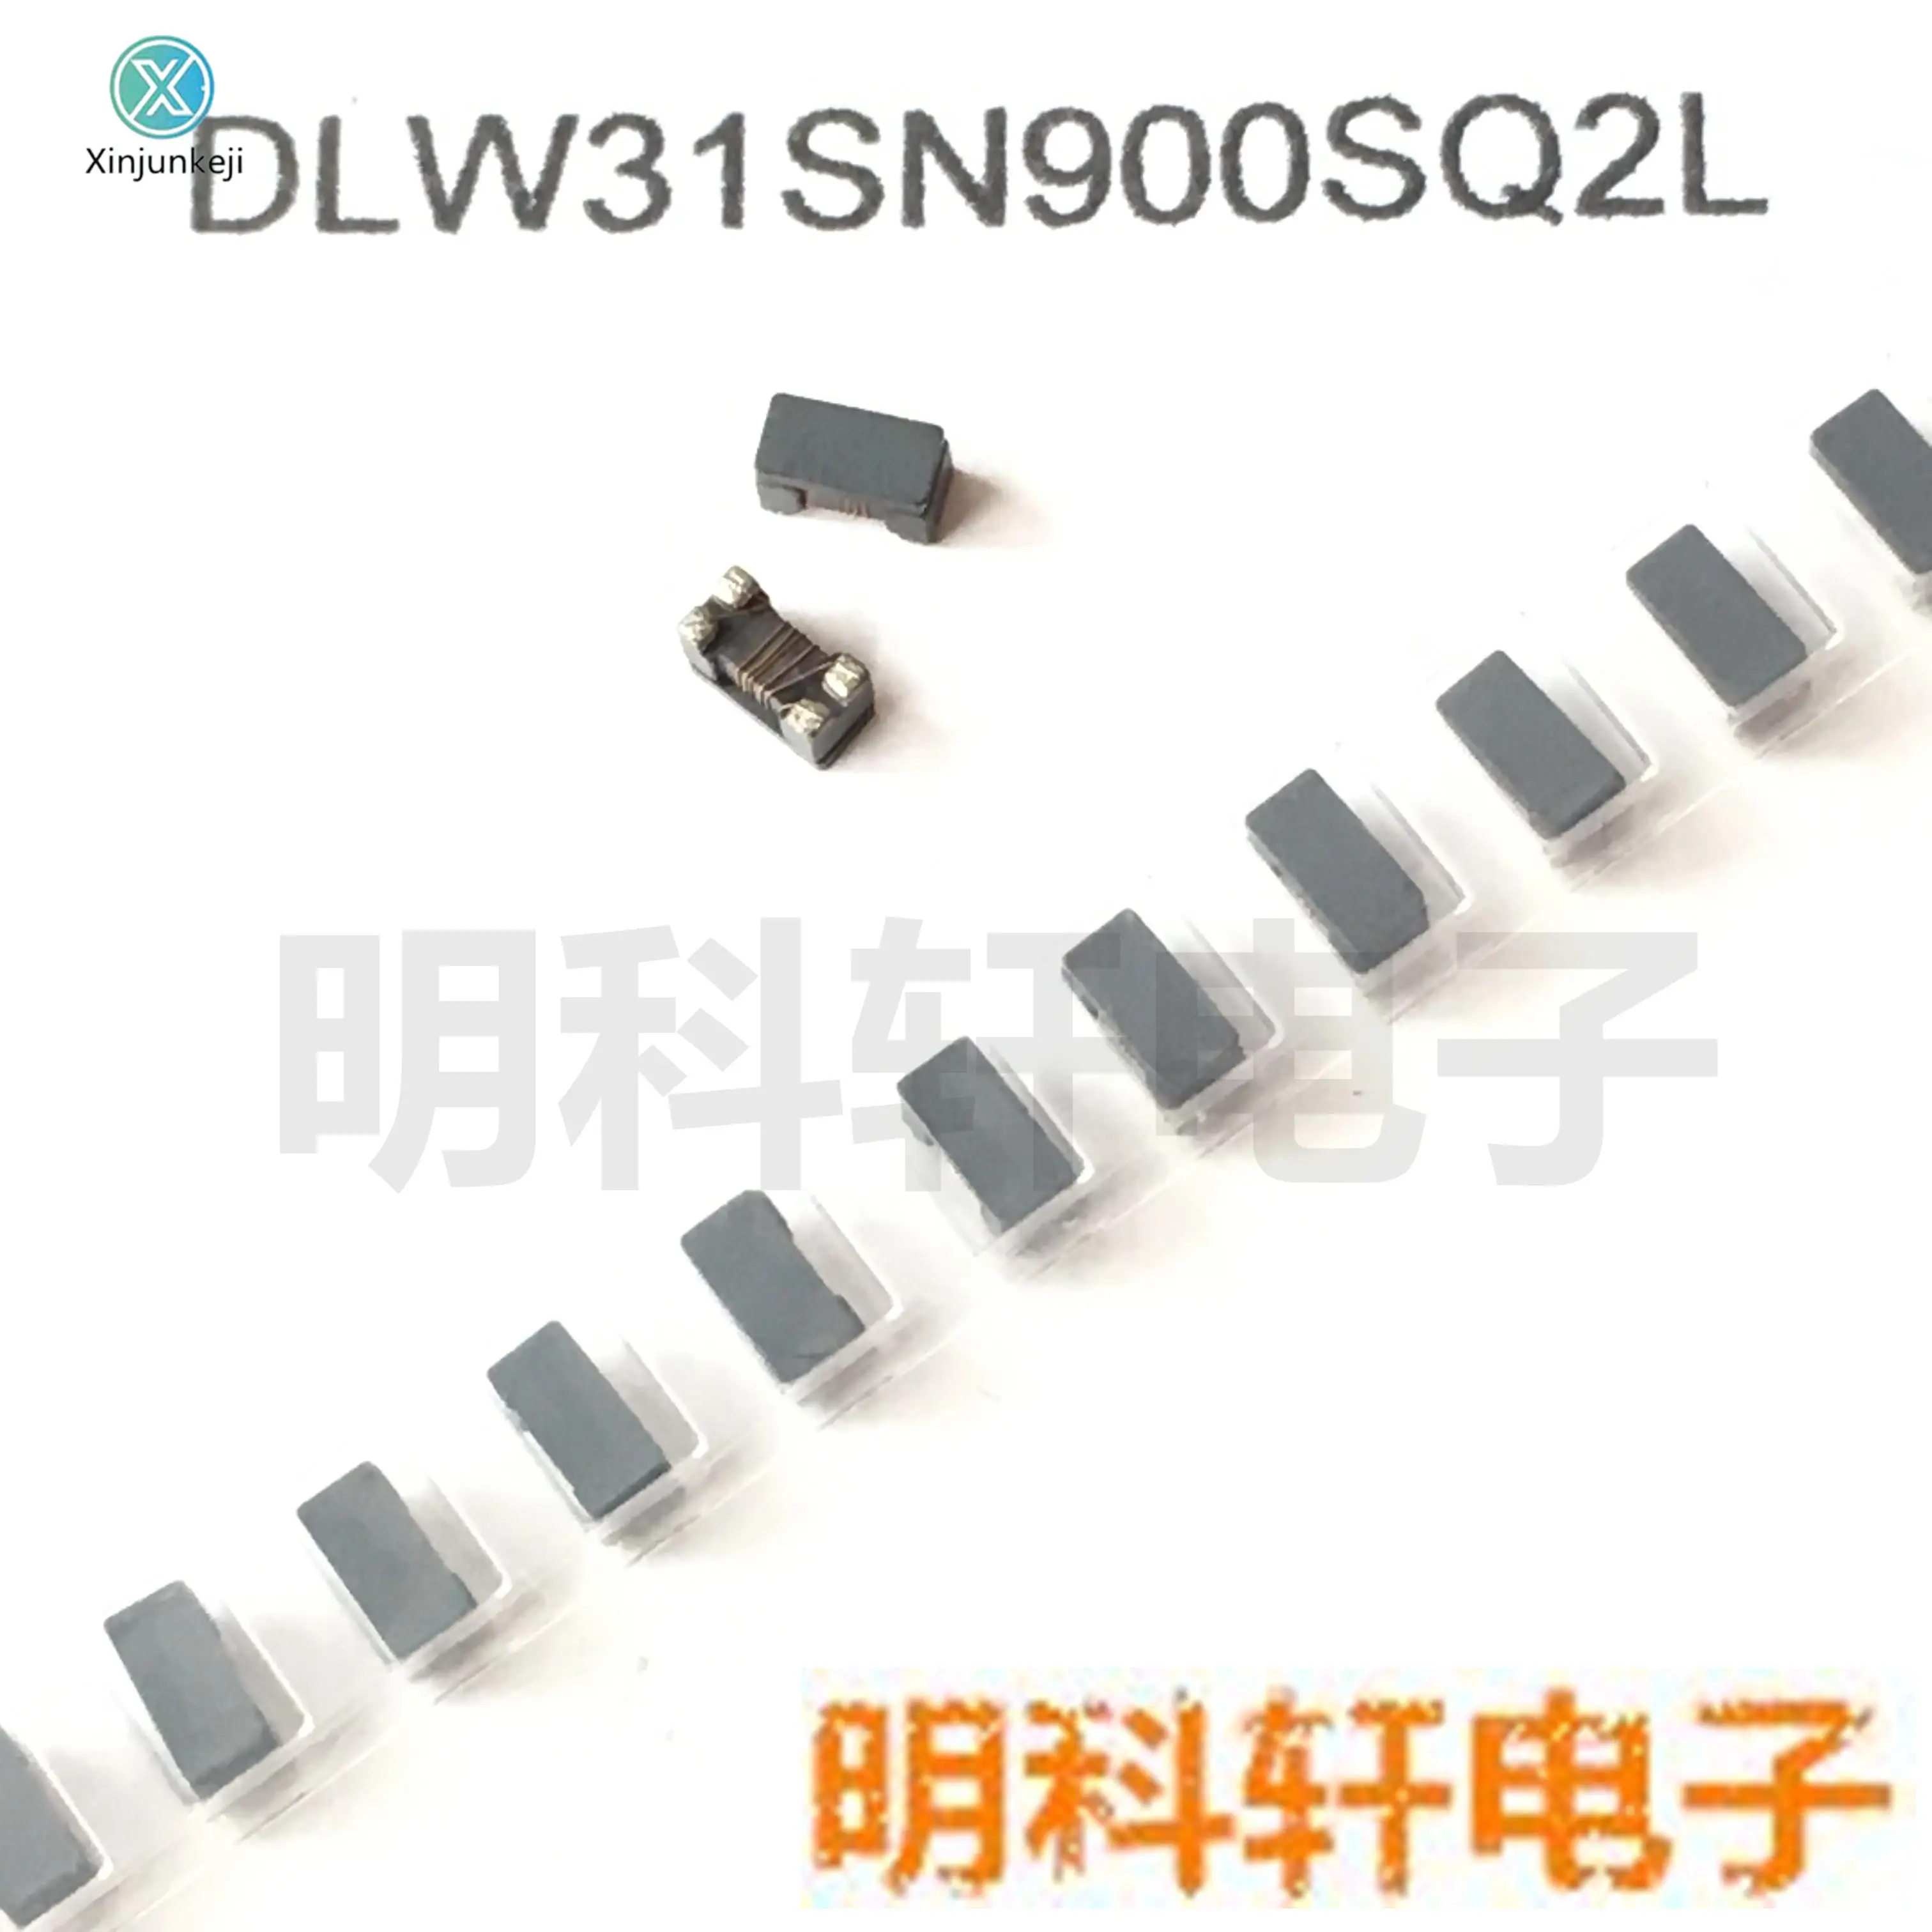 

20pcs orginal new DLW31SN900SQ2L SMD common mode inductor filter 1206 90R